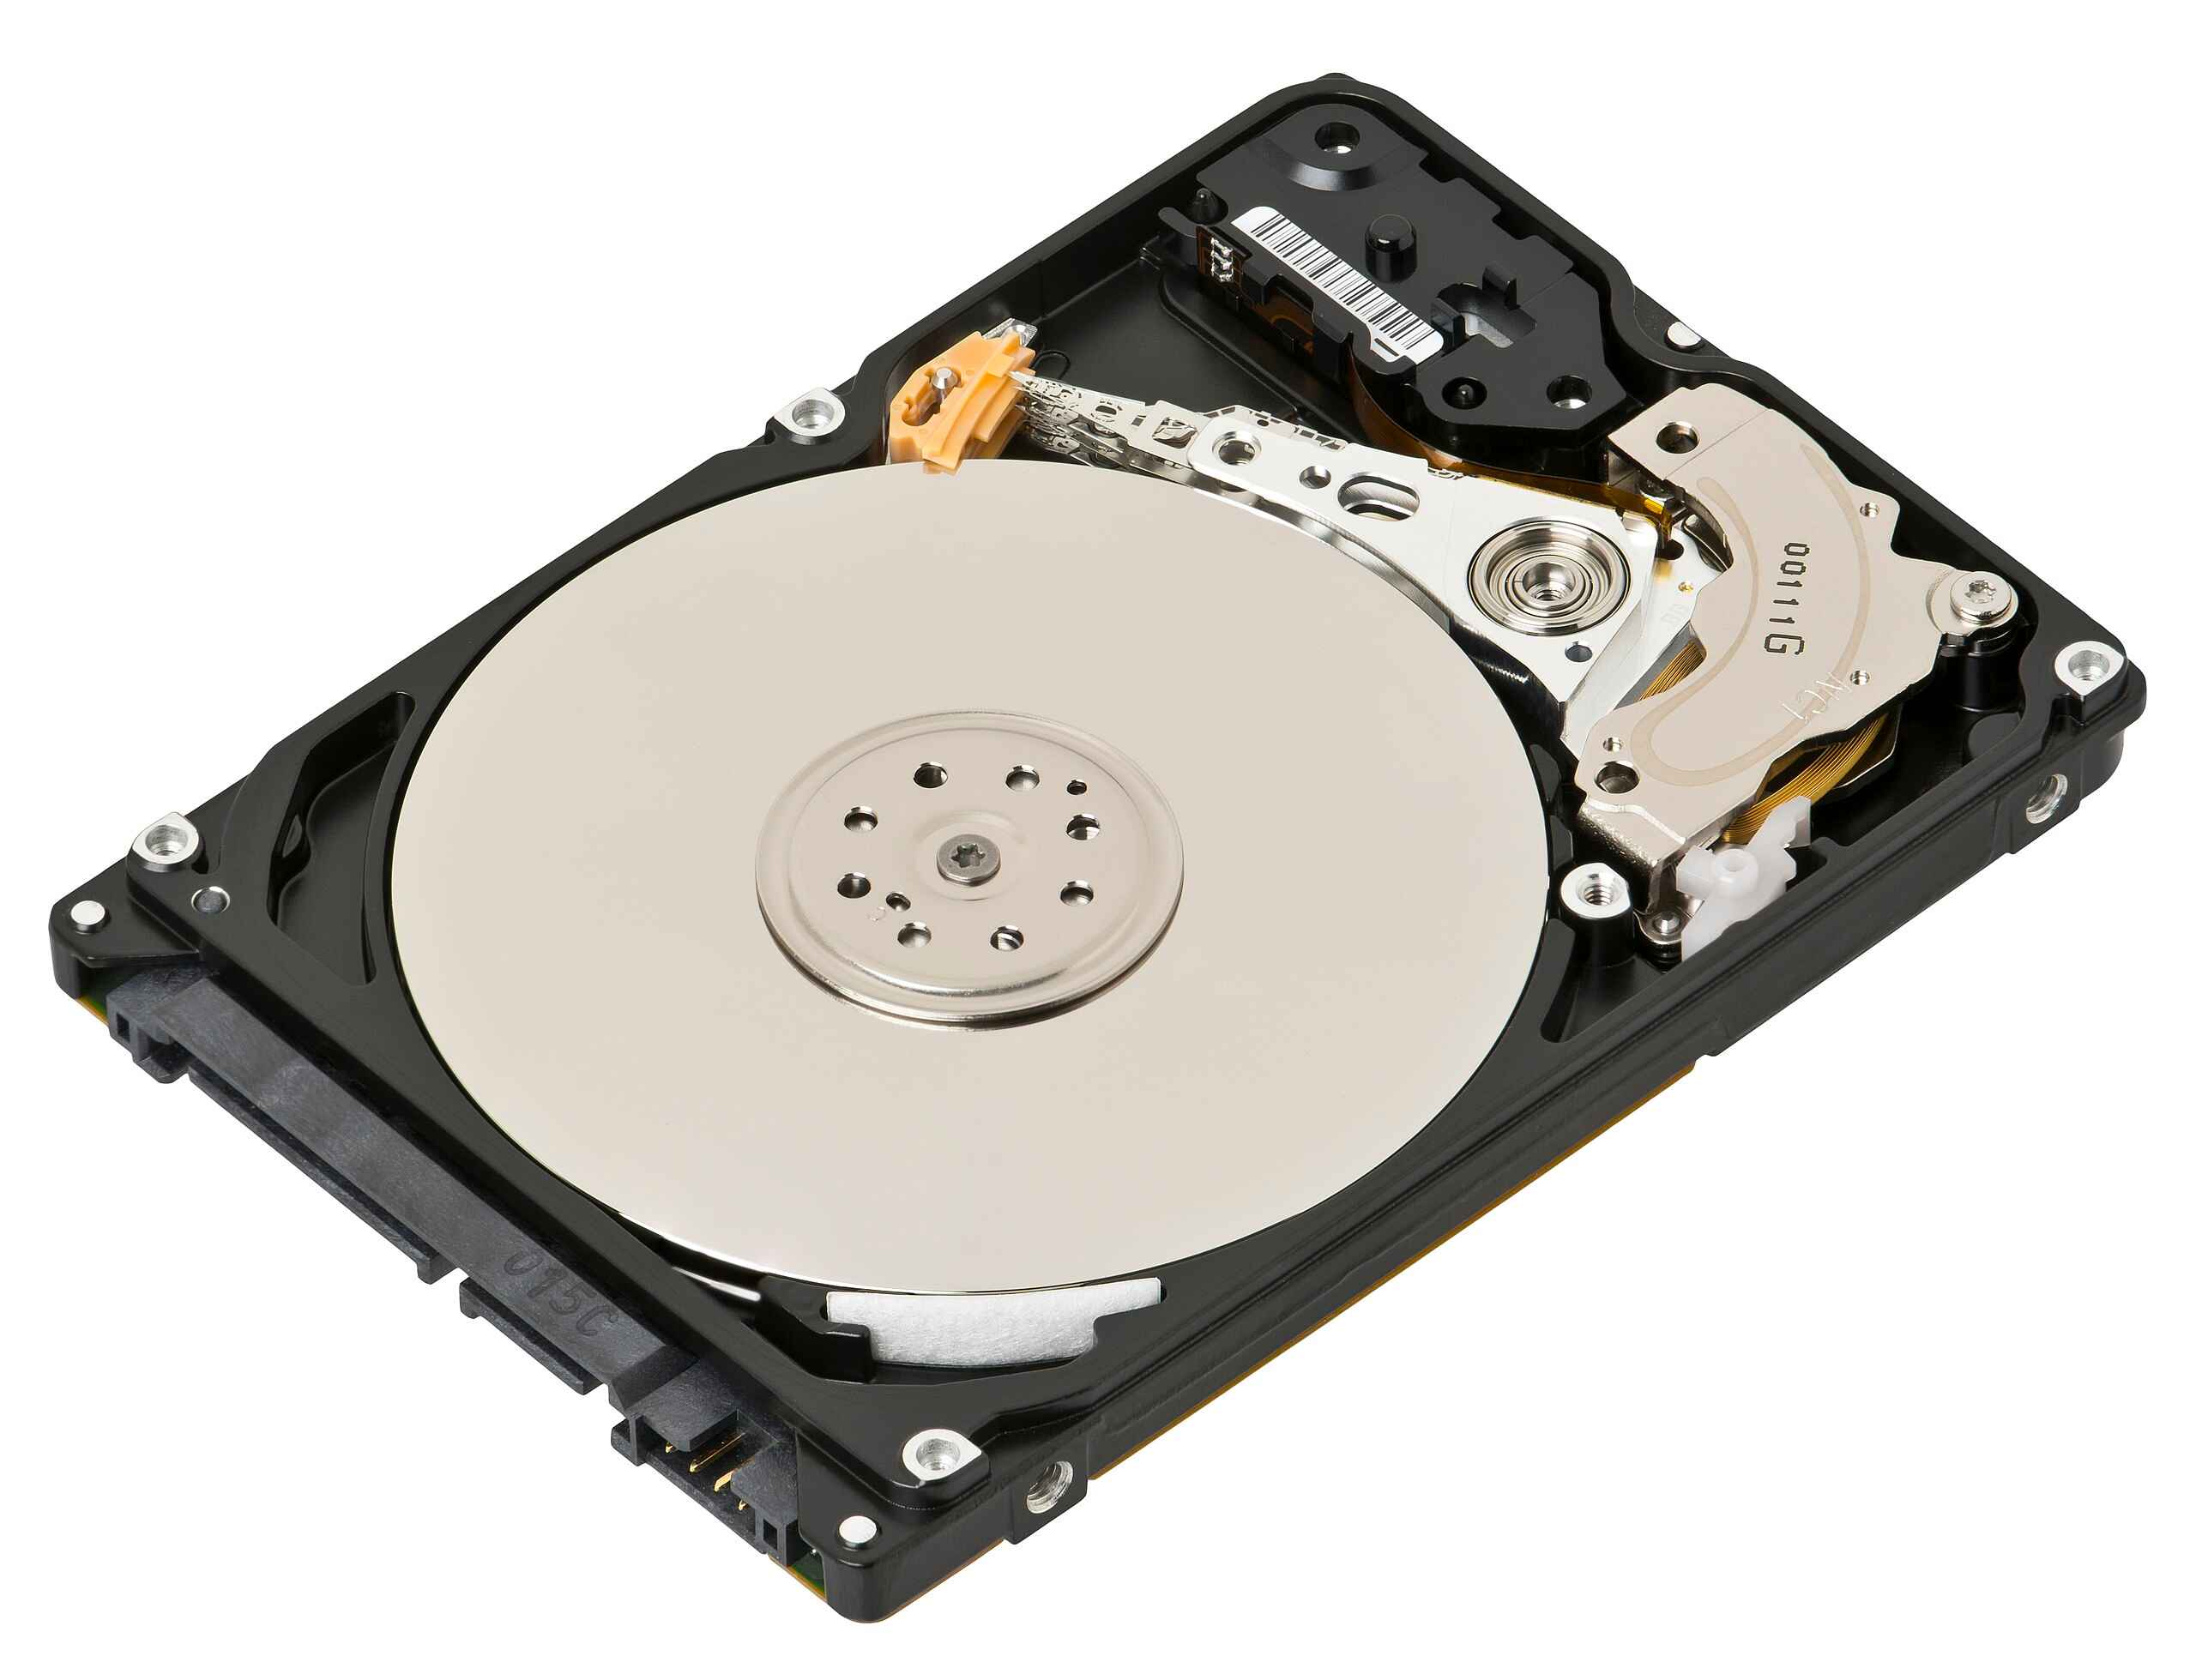 How To Create An Image Of Hard Disk Drive